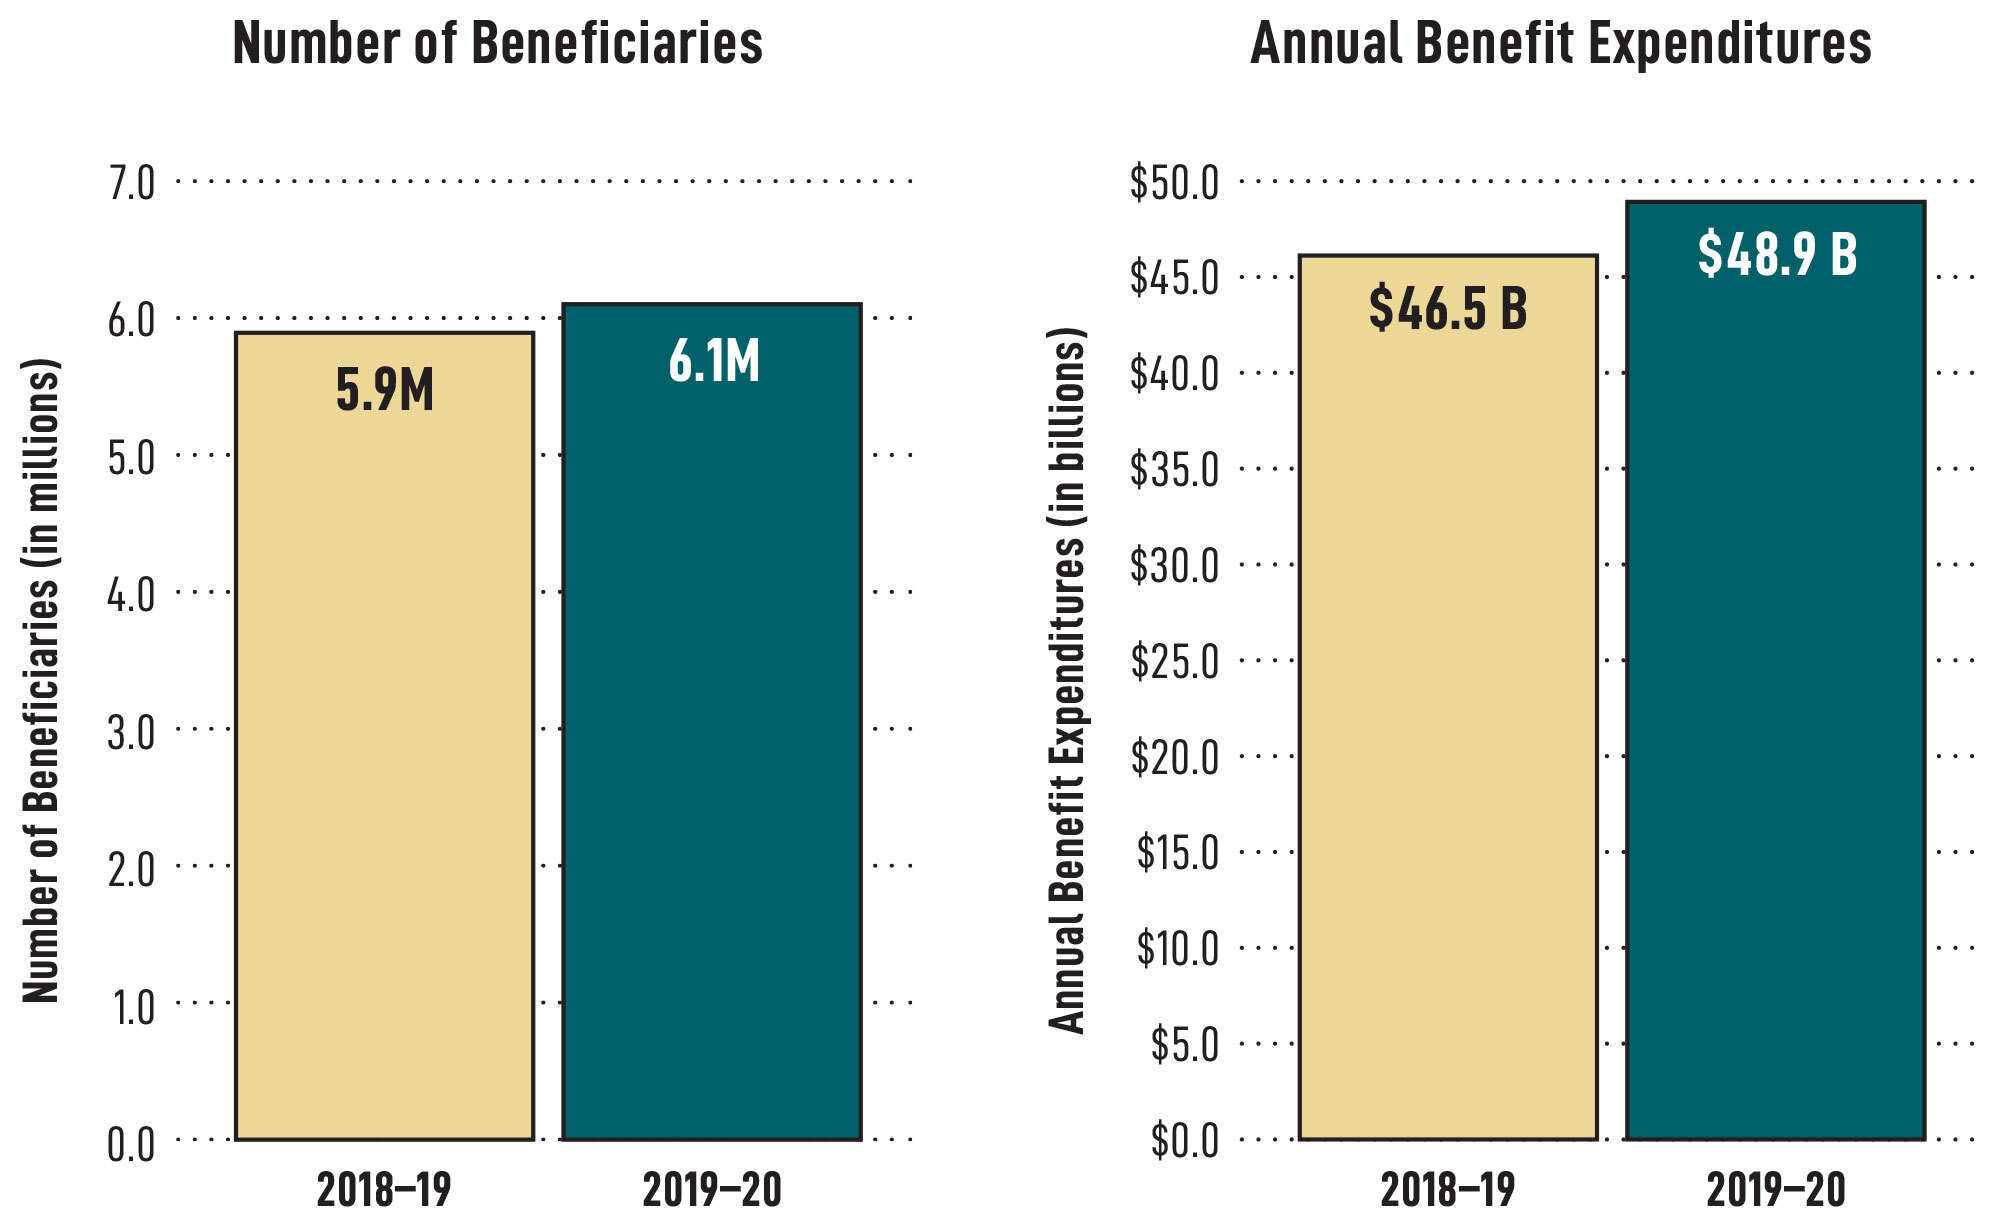 CPP beneficiaries and benefit expenditures by fiscal year